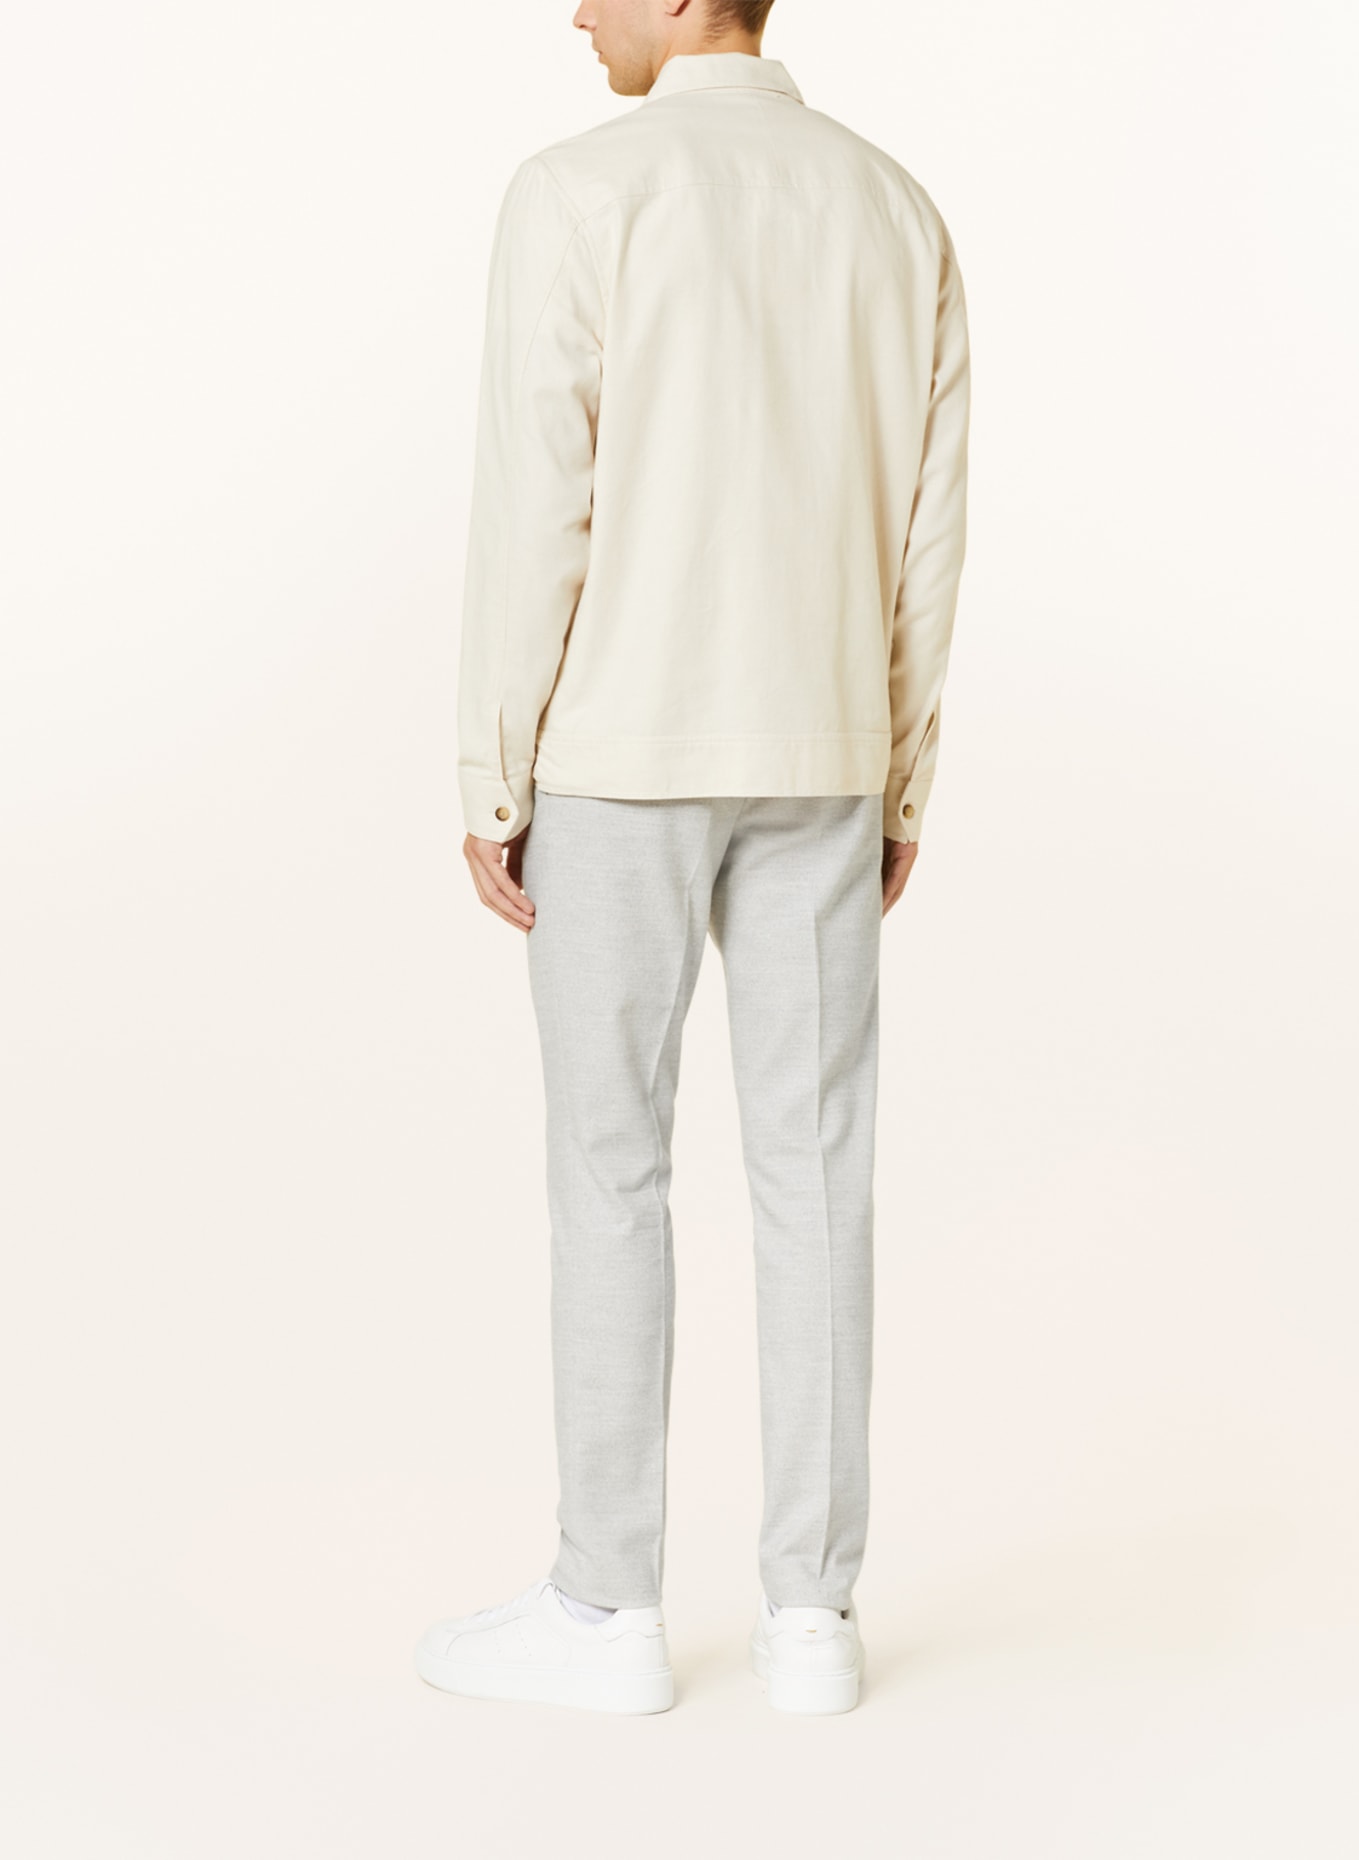 PROFUOMO Pants in jogger style, Color: LIGHT GRAY (Image 3)